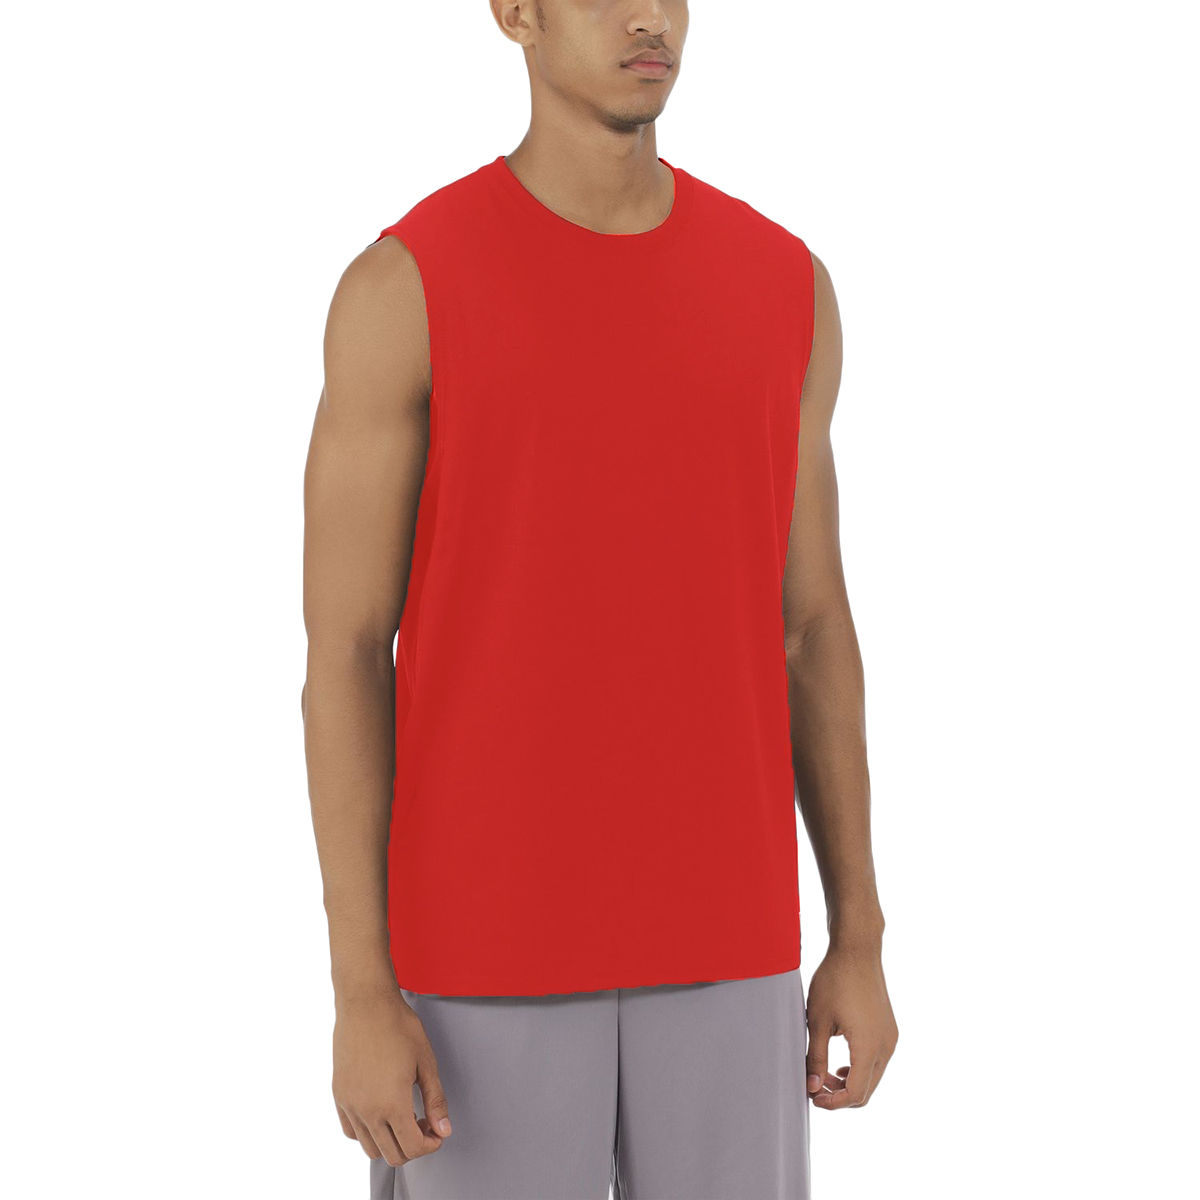 Russell Men's Essential Sleeveless Muscle Tee